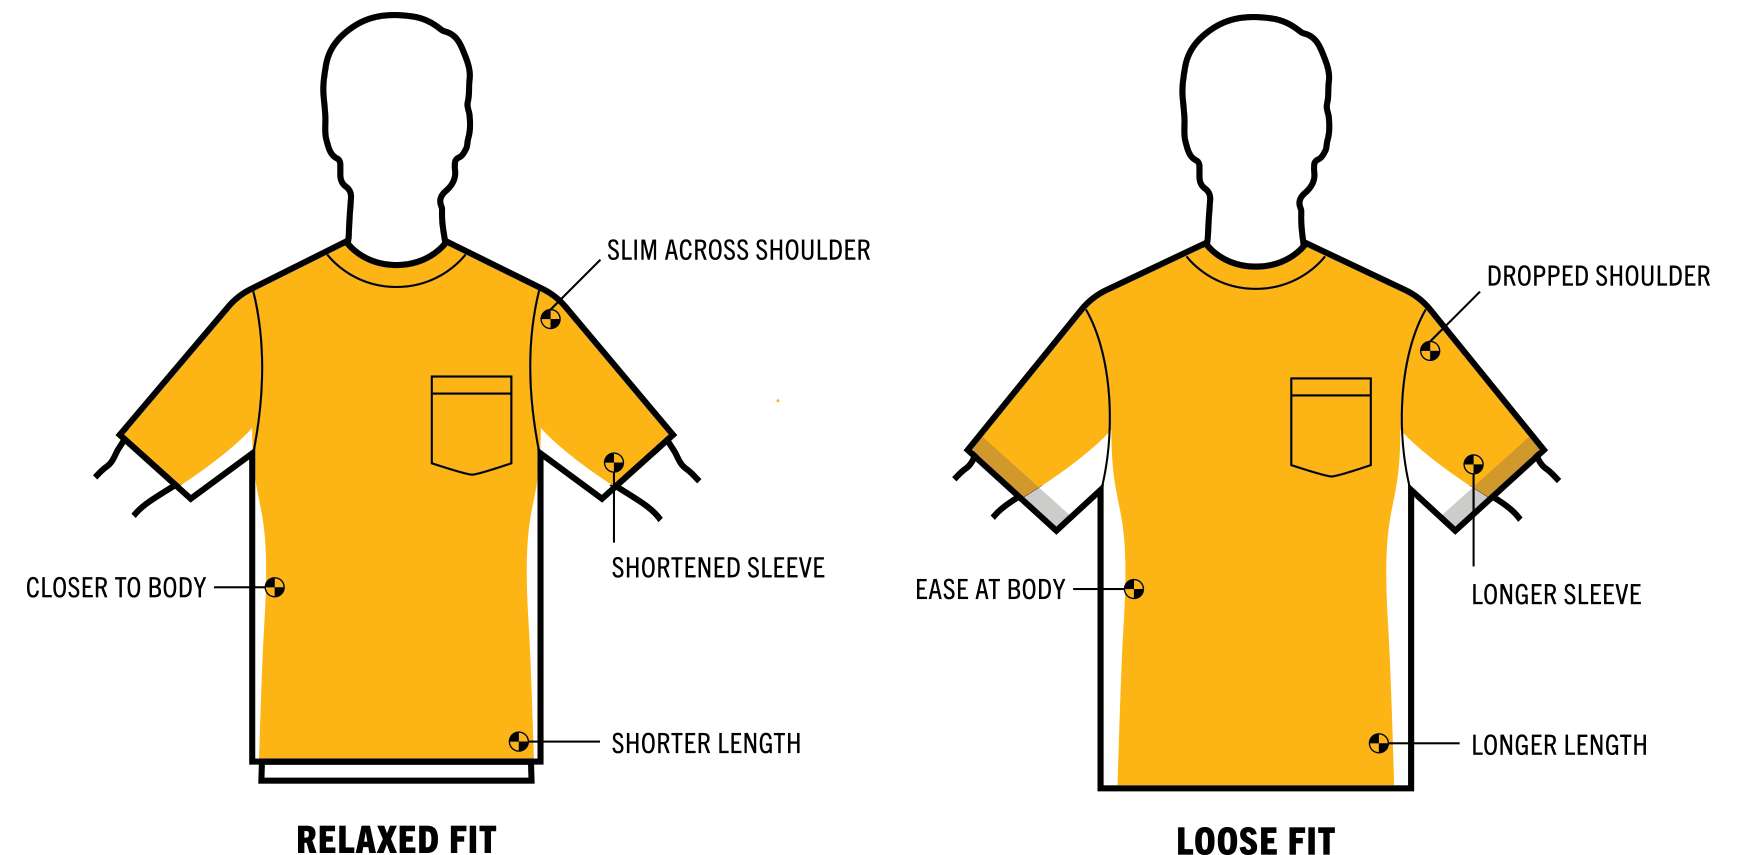 Official Carhartt Men's Clothing Size & Fit Guide